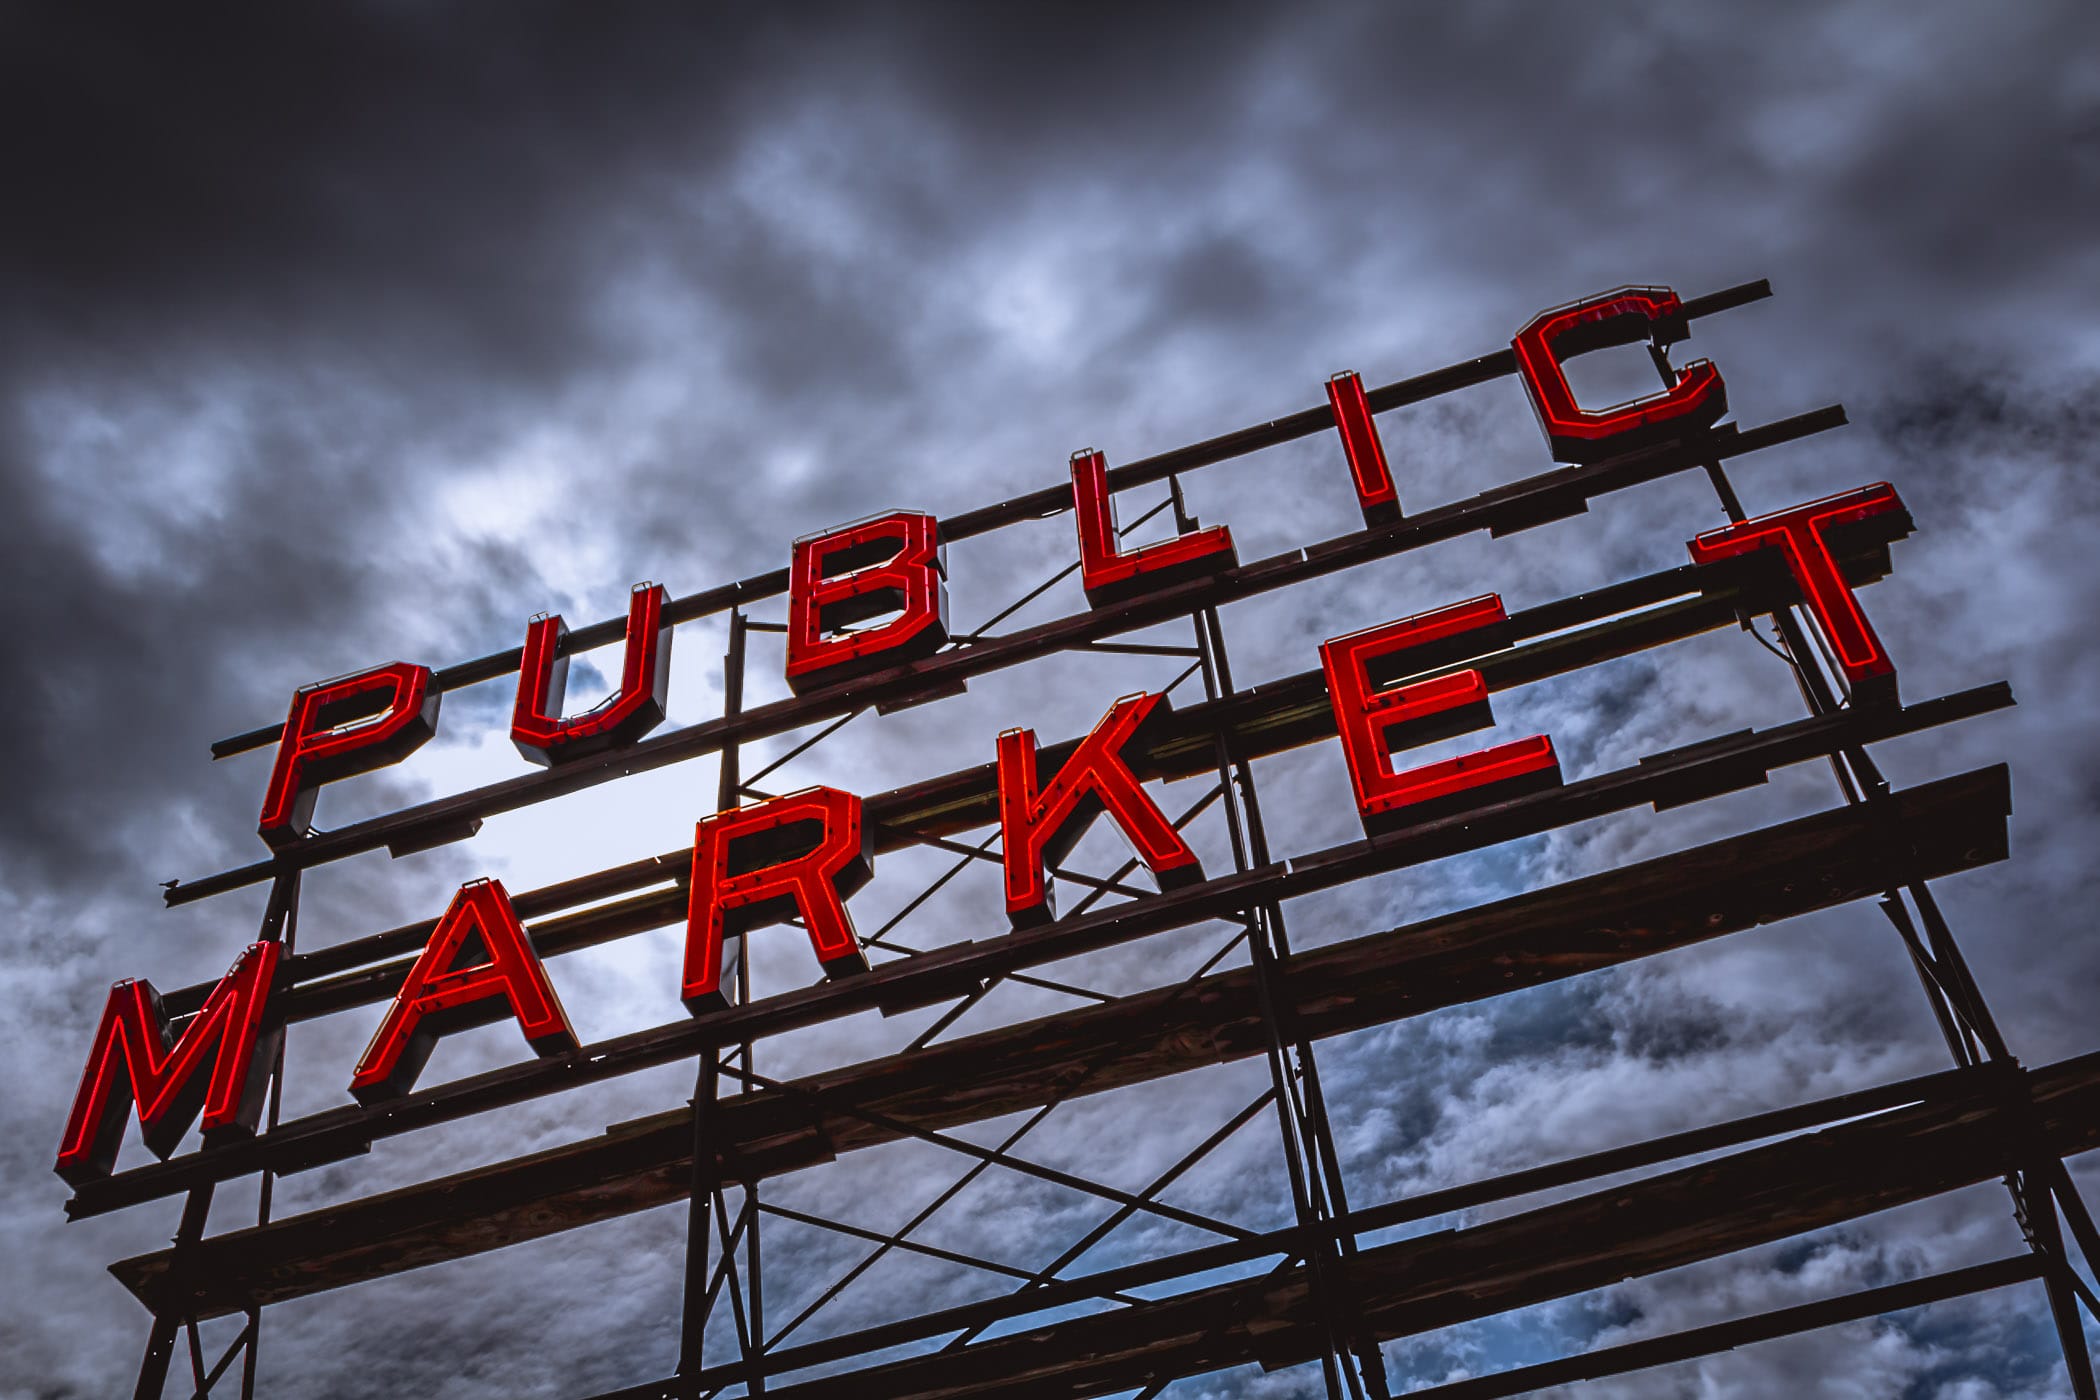 One of the large, rooftop signs at Seattle's Pike Place Market.